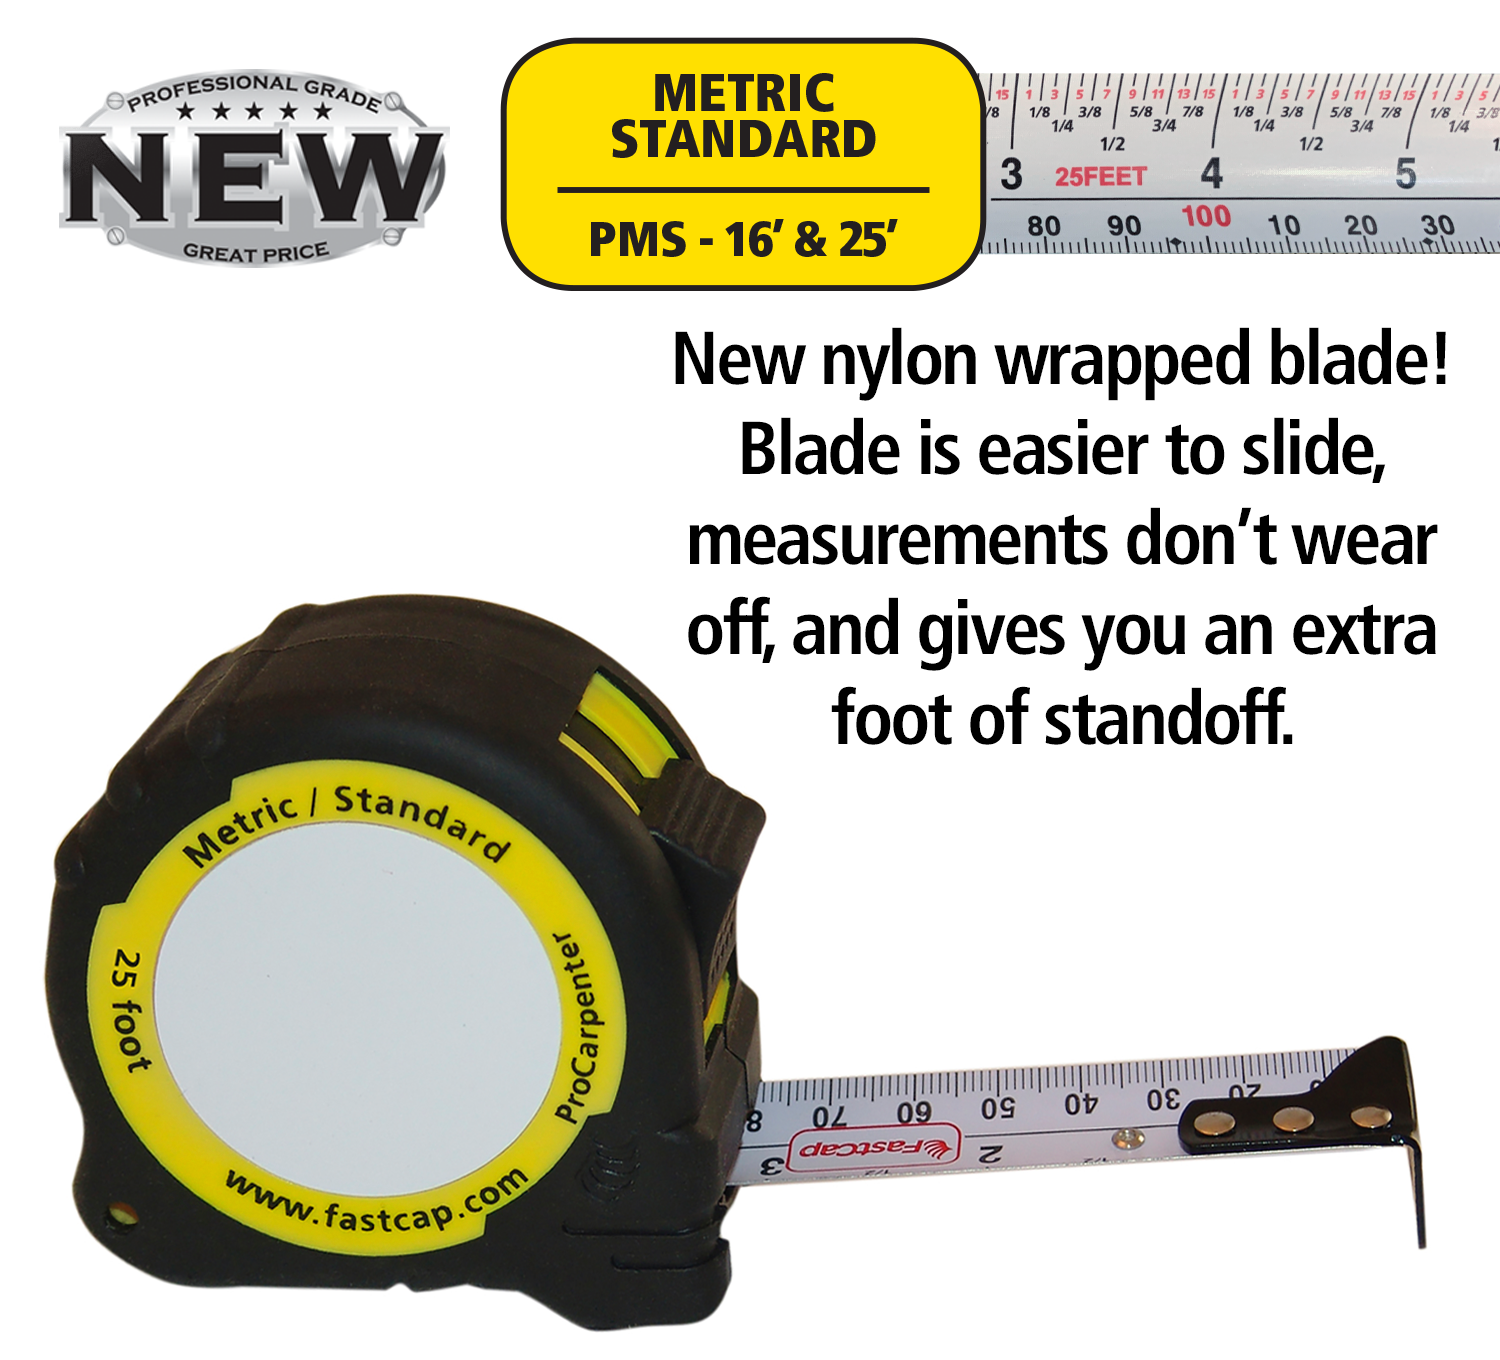 Measuring tapes shock-resistant ABS casings, PVC-coated fibreglass tapes,  precision class III 1694/L – Beta Tools